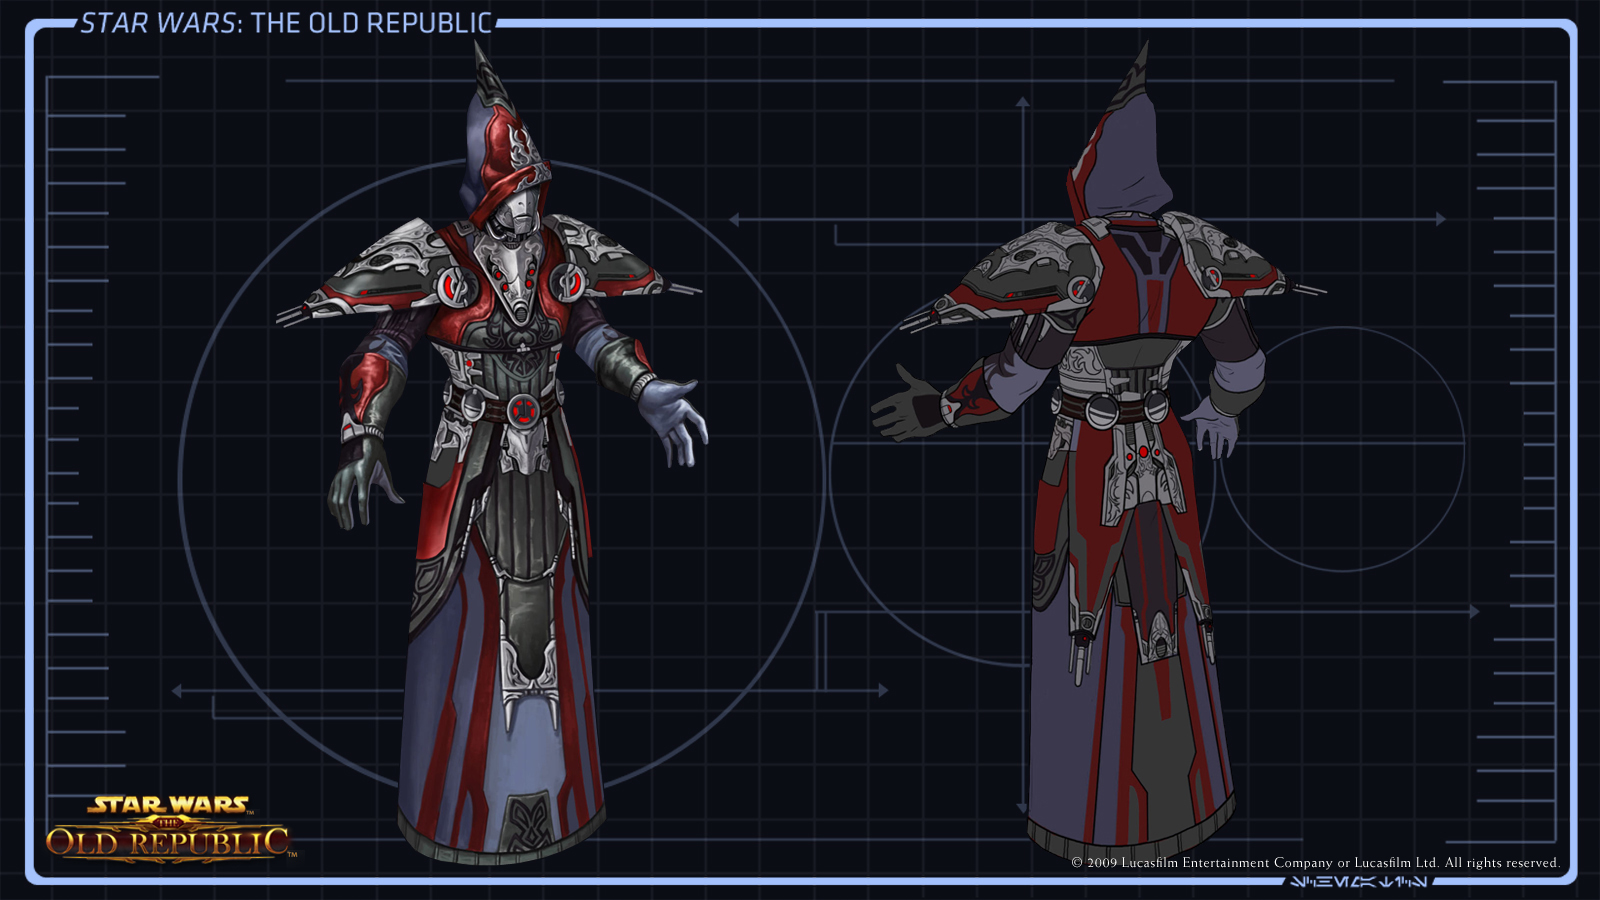 SWTOR Sith inquisitor Guide Star Wars Sith Inquisitor Class Guide